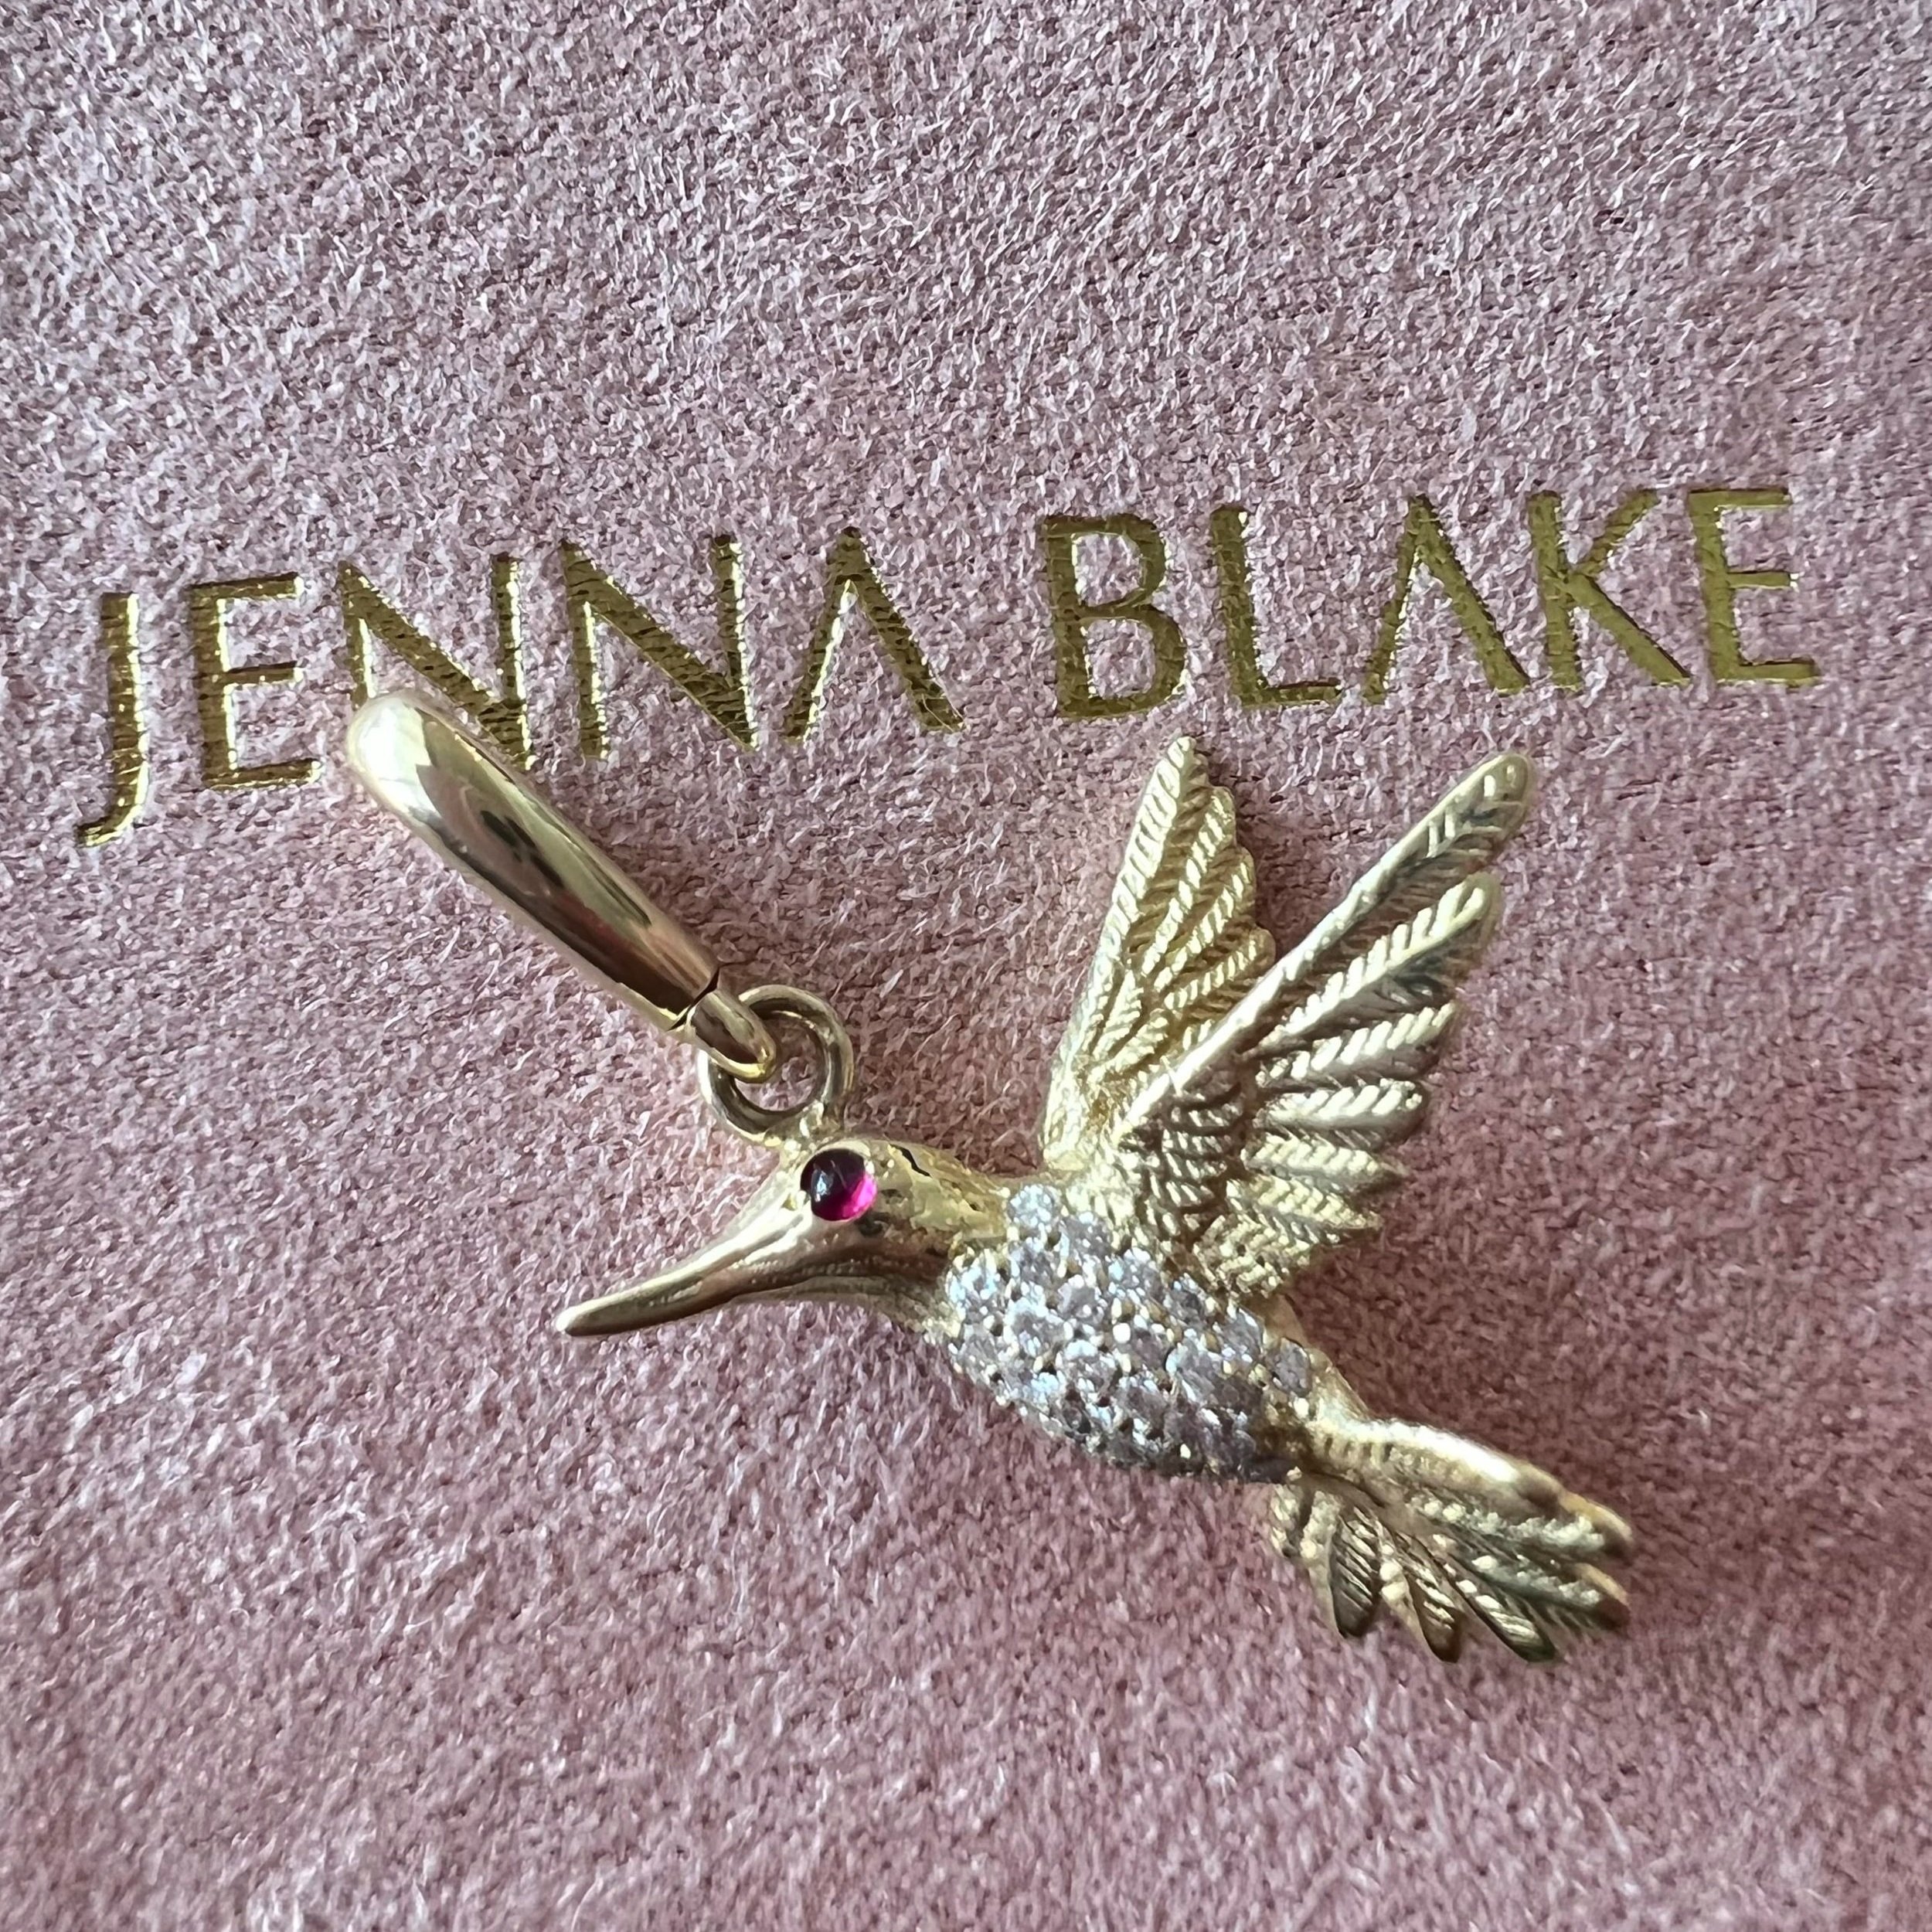 Jewelry that makes Camille feel strong: a hummingbird charm by Jenna Blake